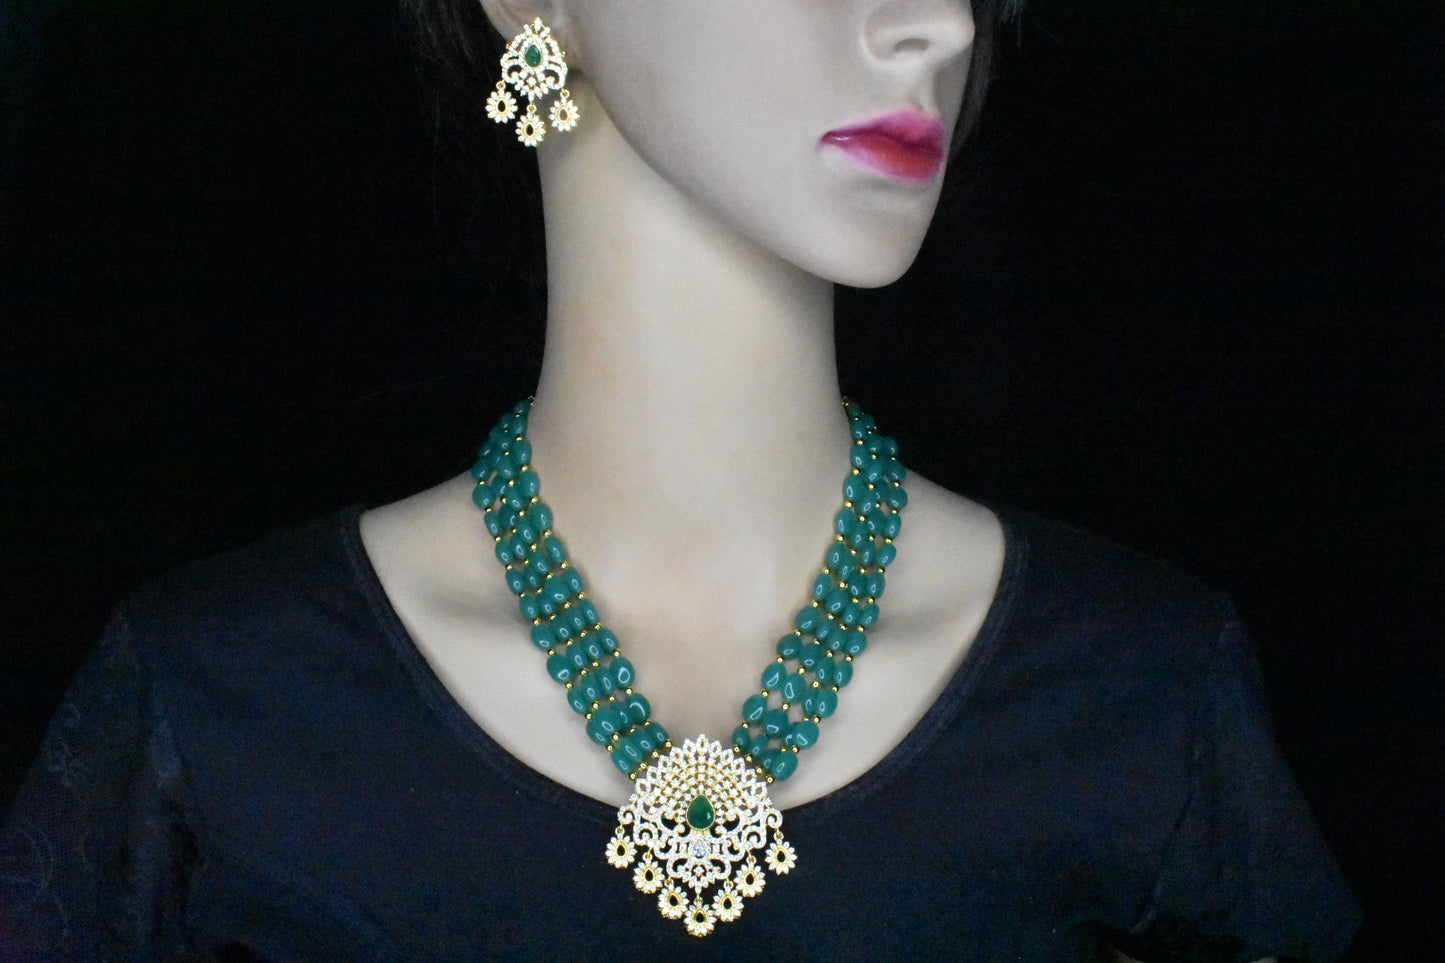 Emerald beads necklace with Cz pendant
Set